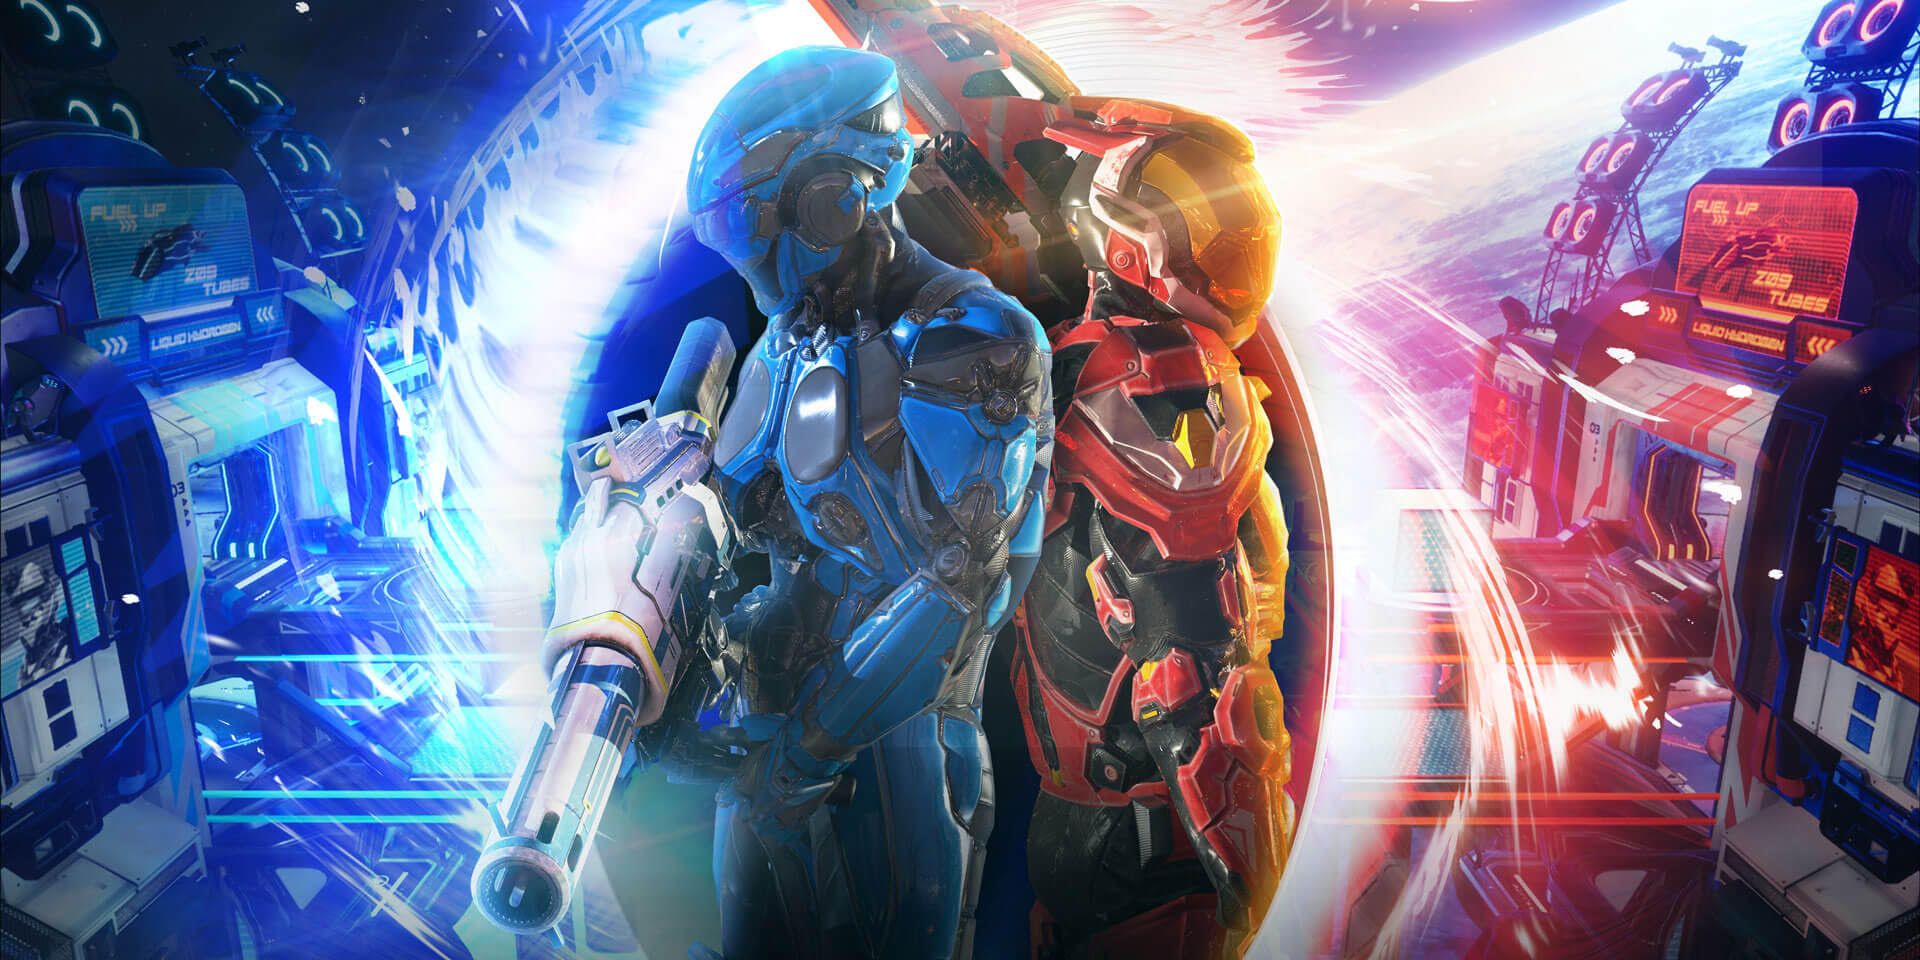 A red and blue soldier stand back to back in front of merging portals